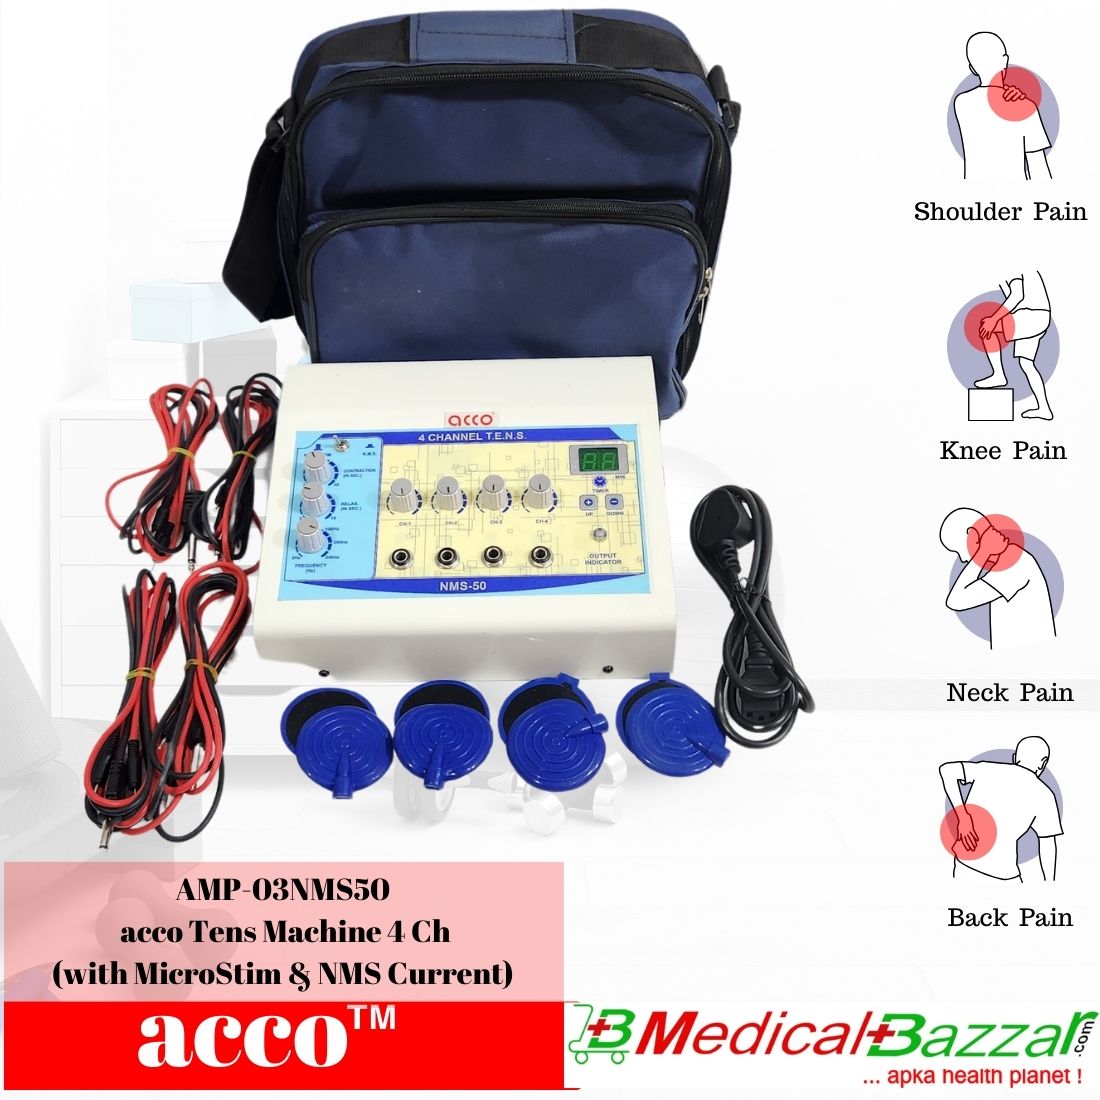 acco 4ch Tens Machine (with Microstim & NMS Current)